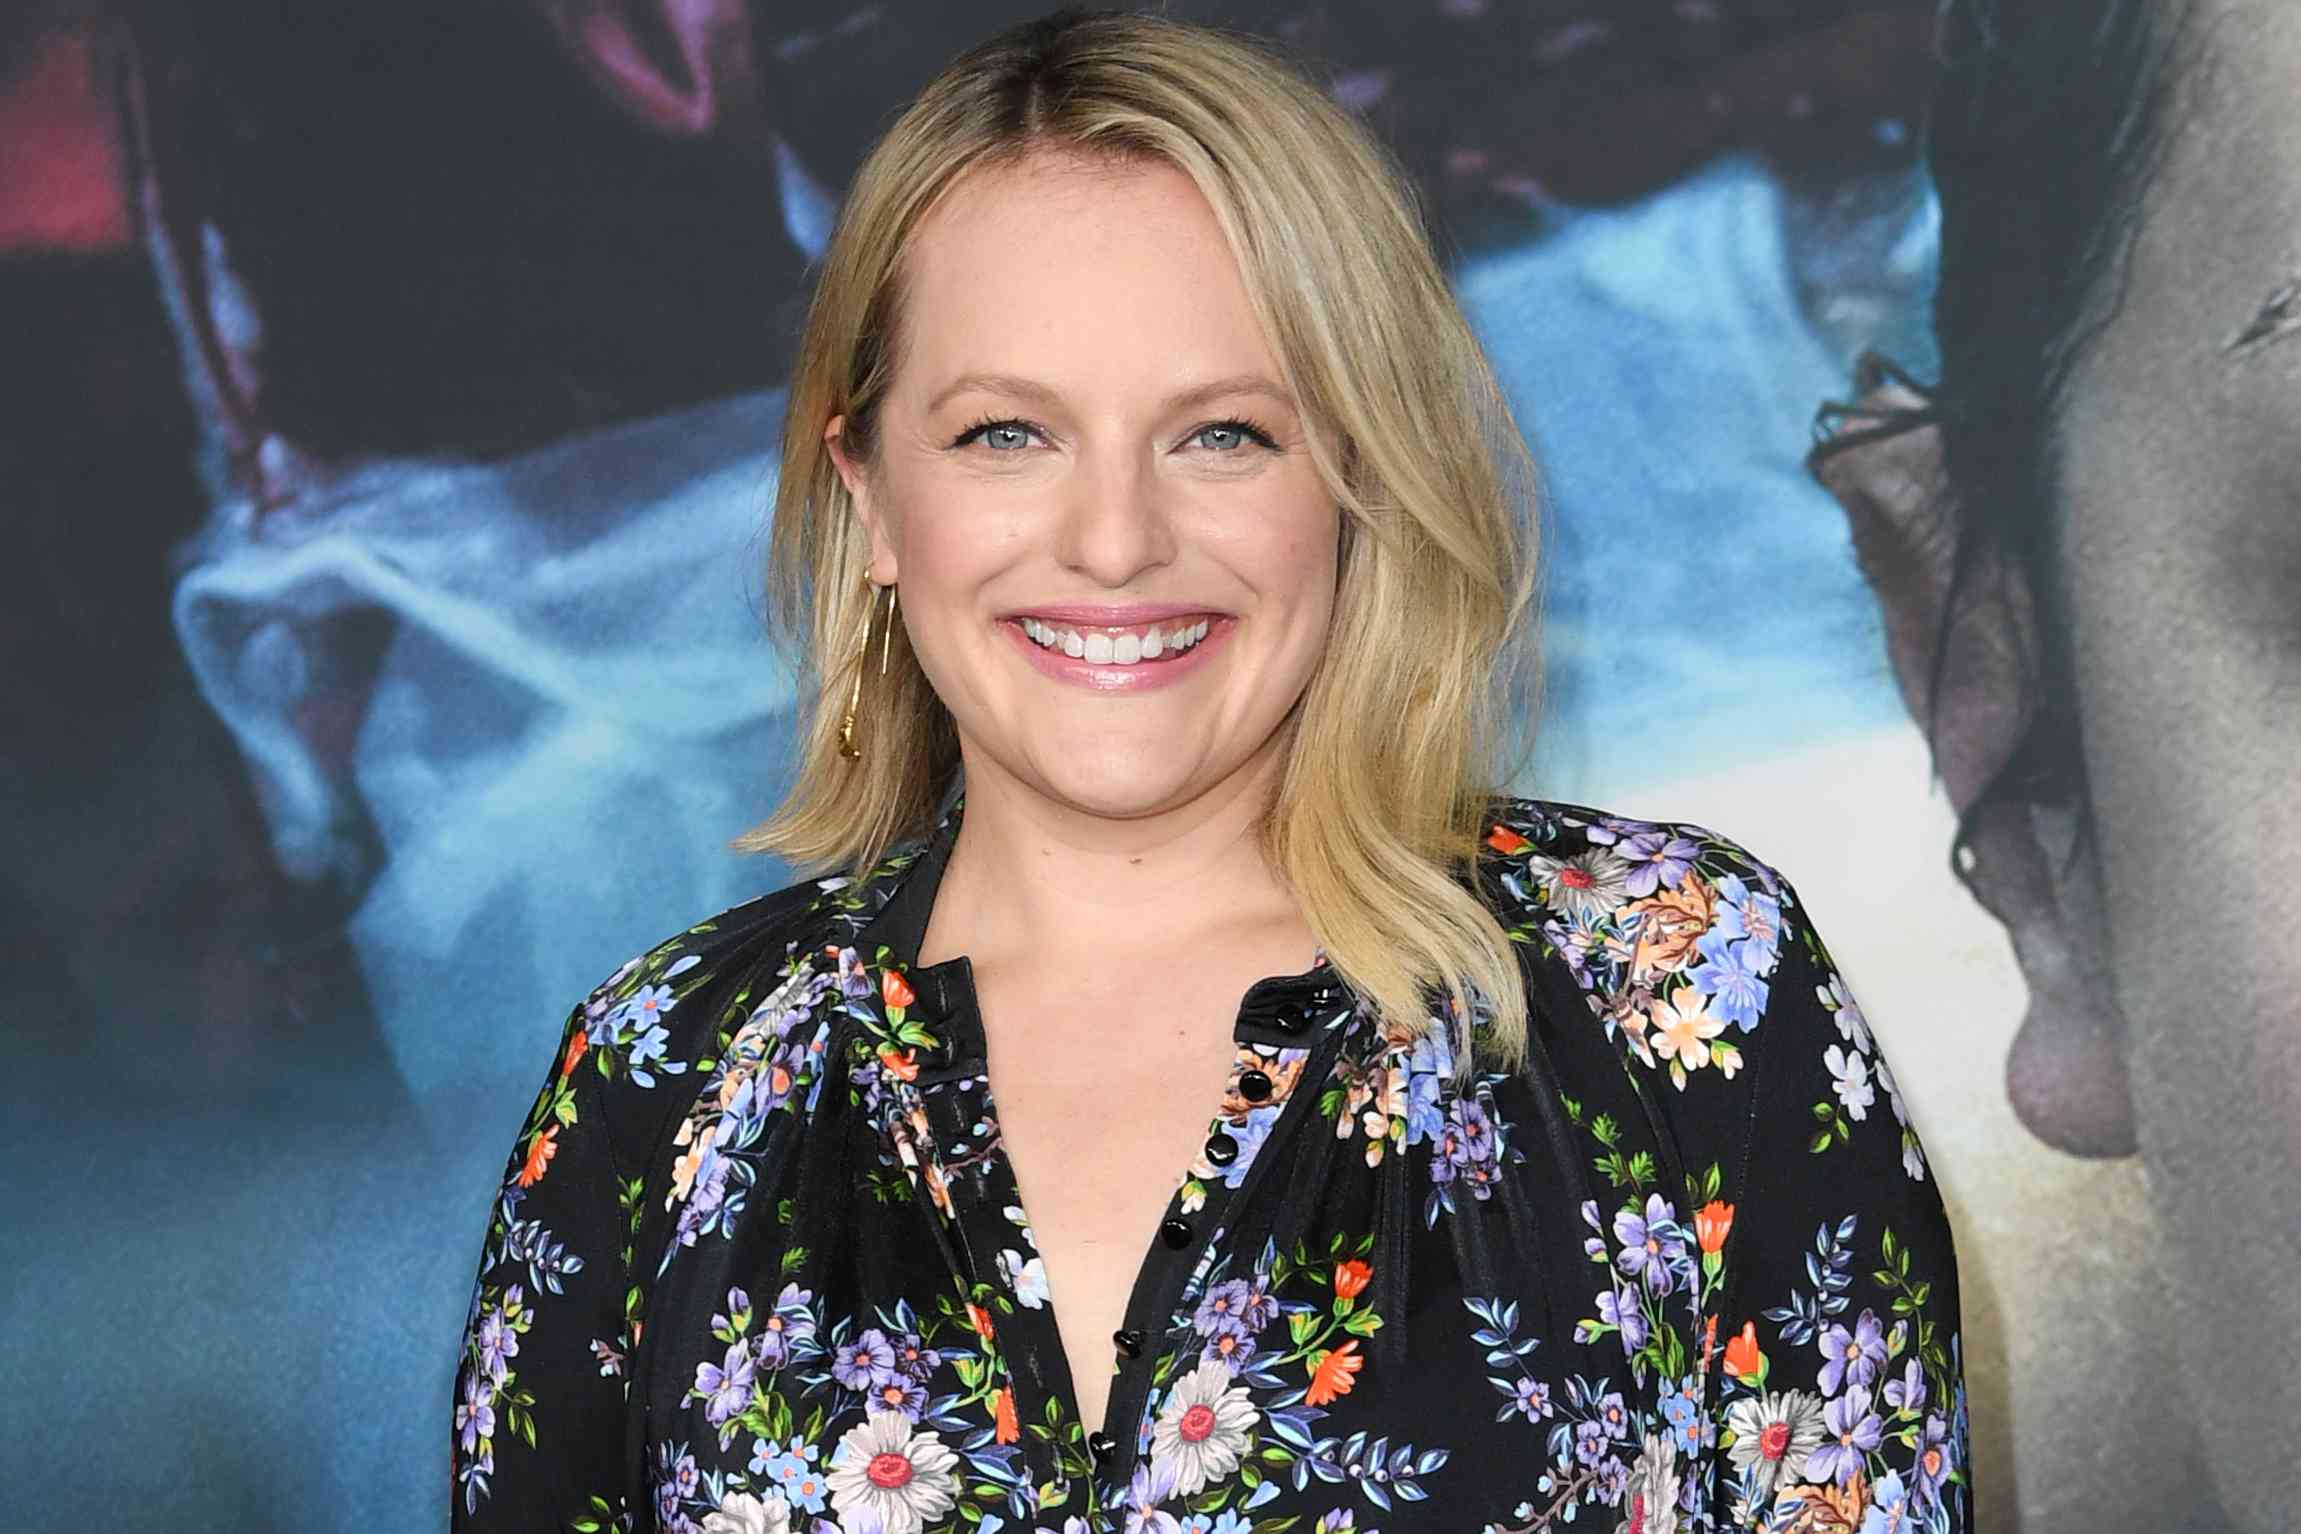 elisabeth moss found playing a chameleon-like spy in “the veil” 'more challenging' than “handmaid's tale”